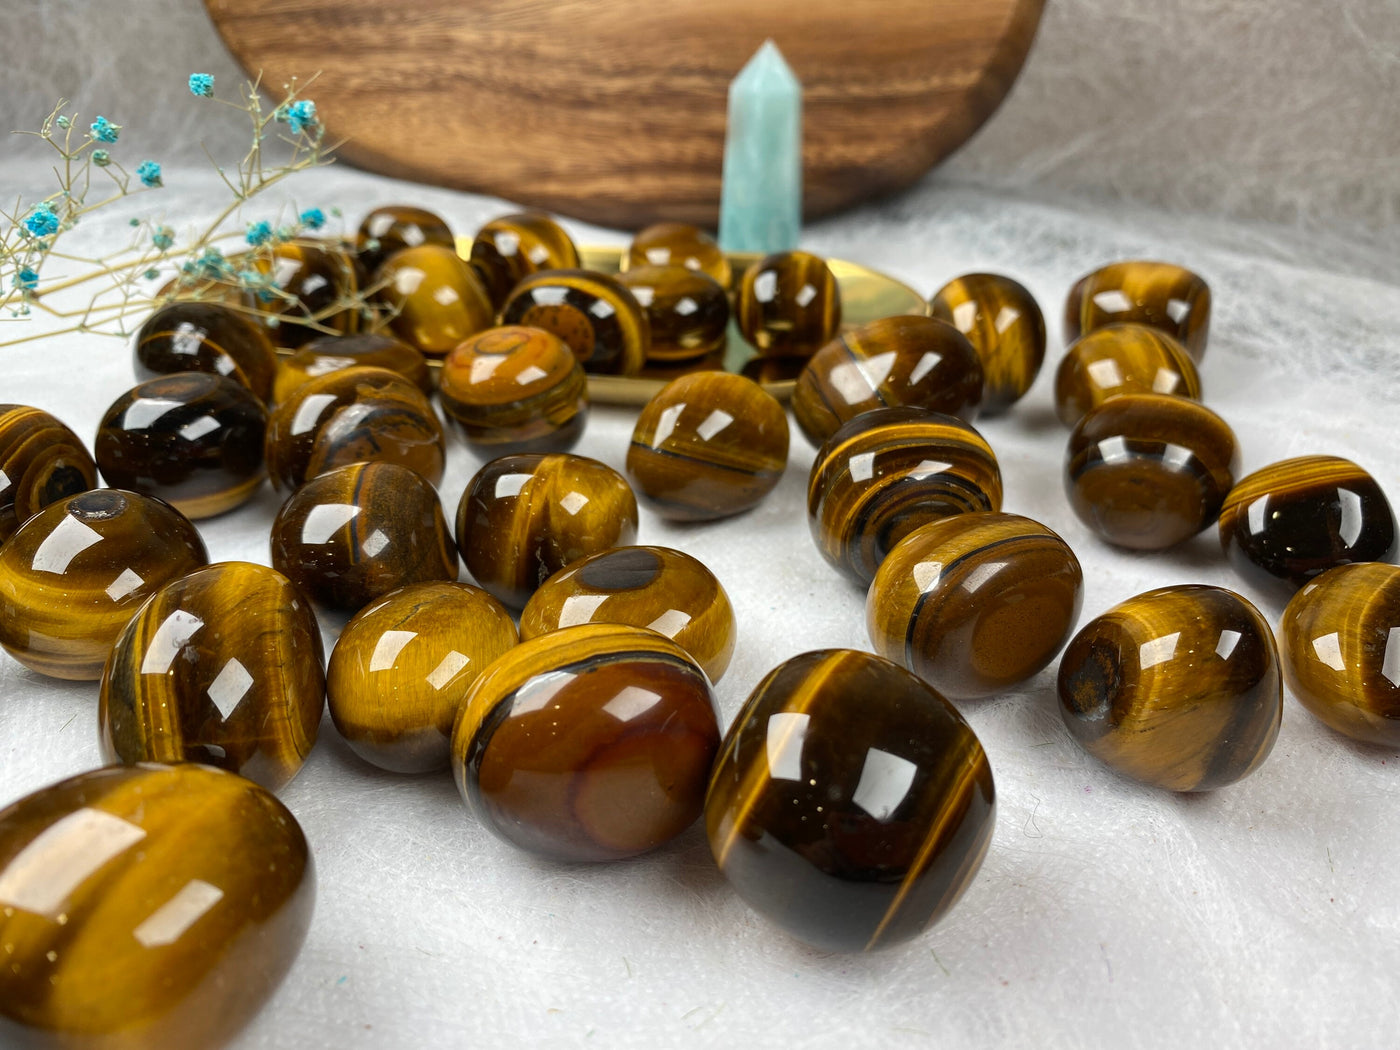 Tiger eye Tumble Stone 20-30mm 100g，Healing Crystal，Home Decor，For Gift